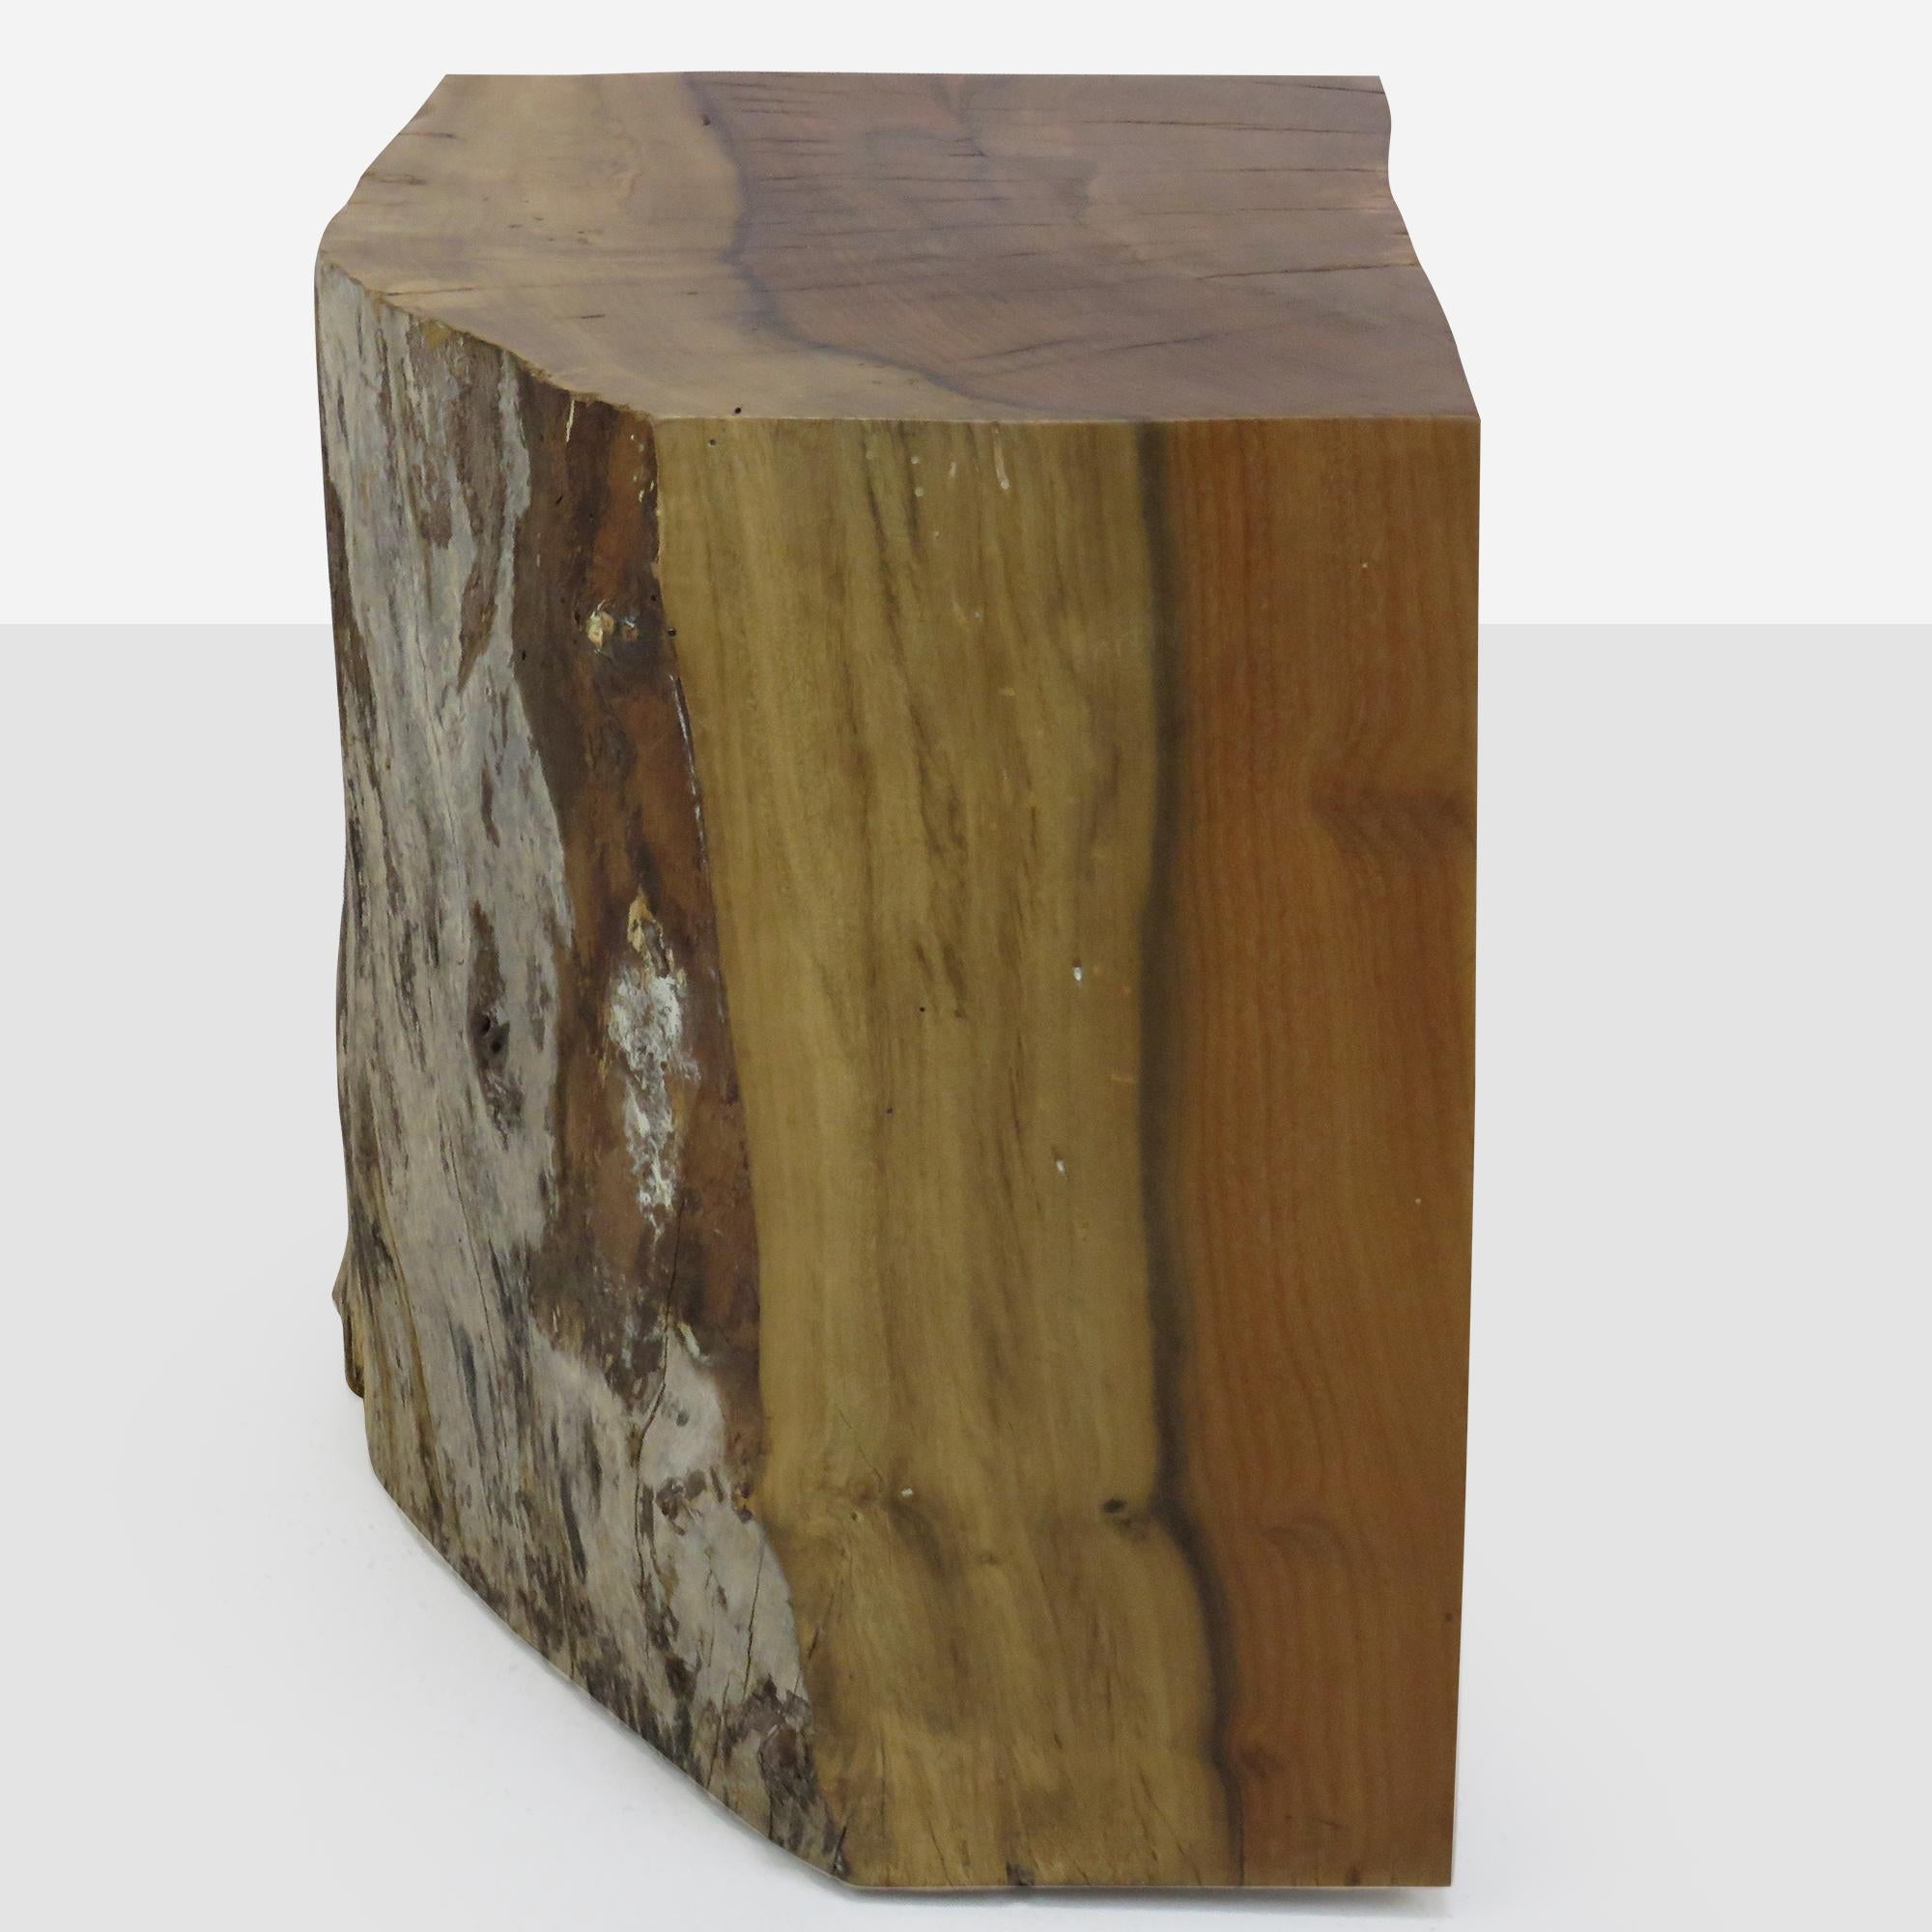 A unique side table of bay laurel with natural lines and a live edge side. 